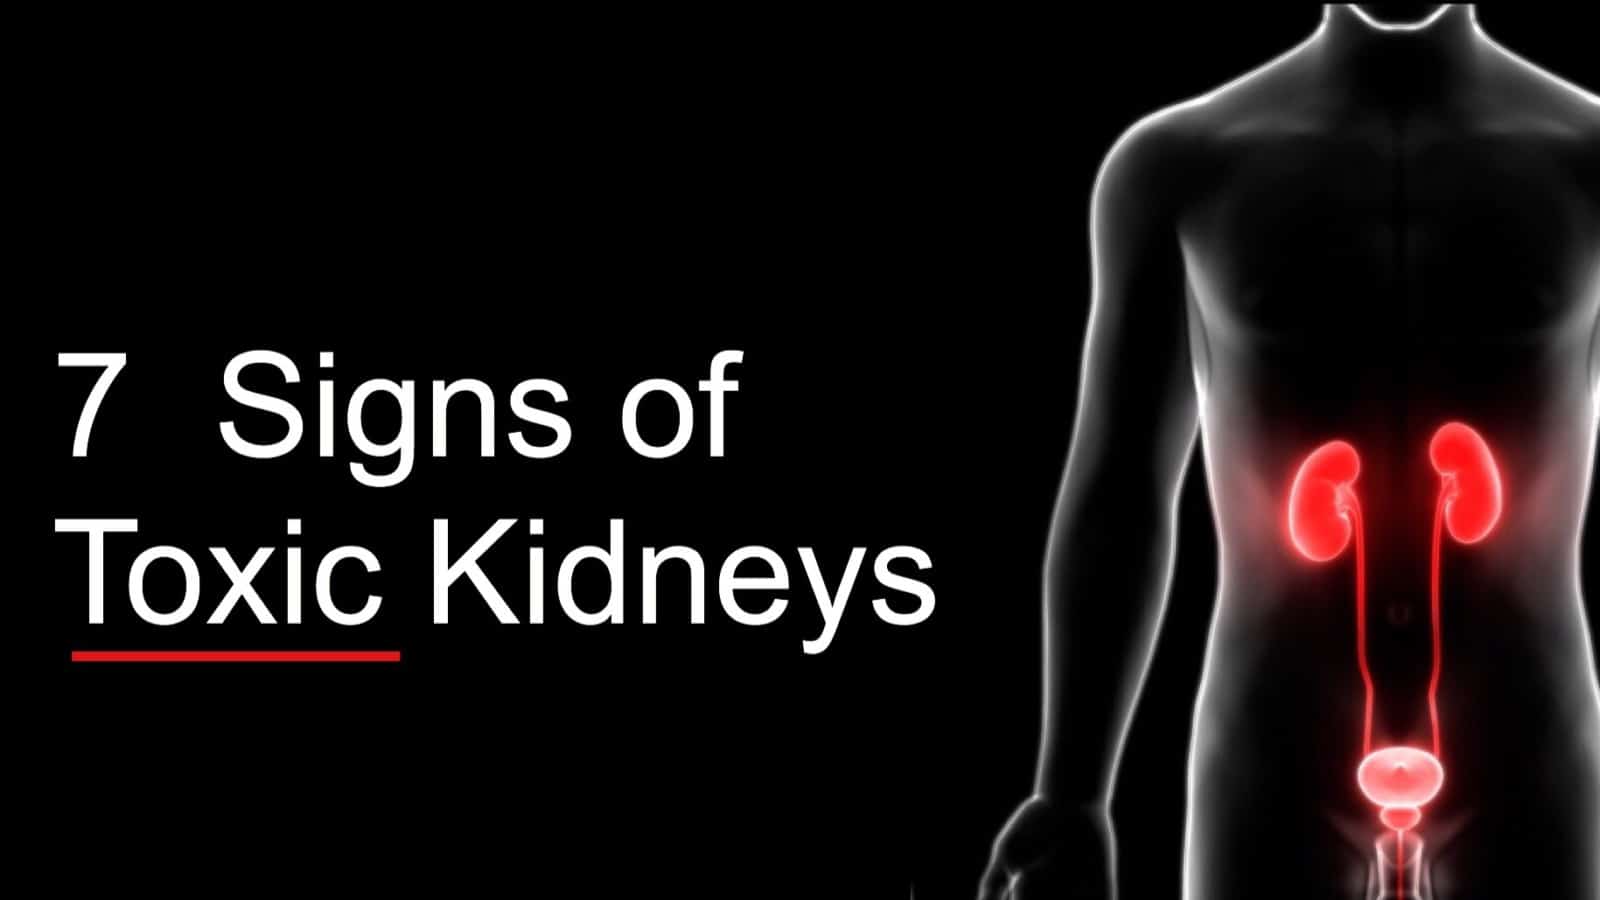 7 Signs of Toxic Kidneys